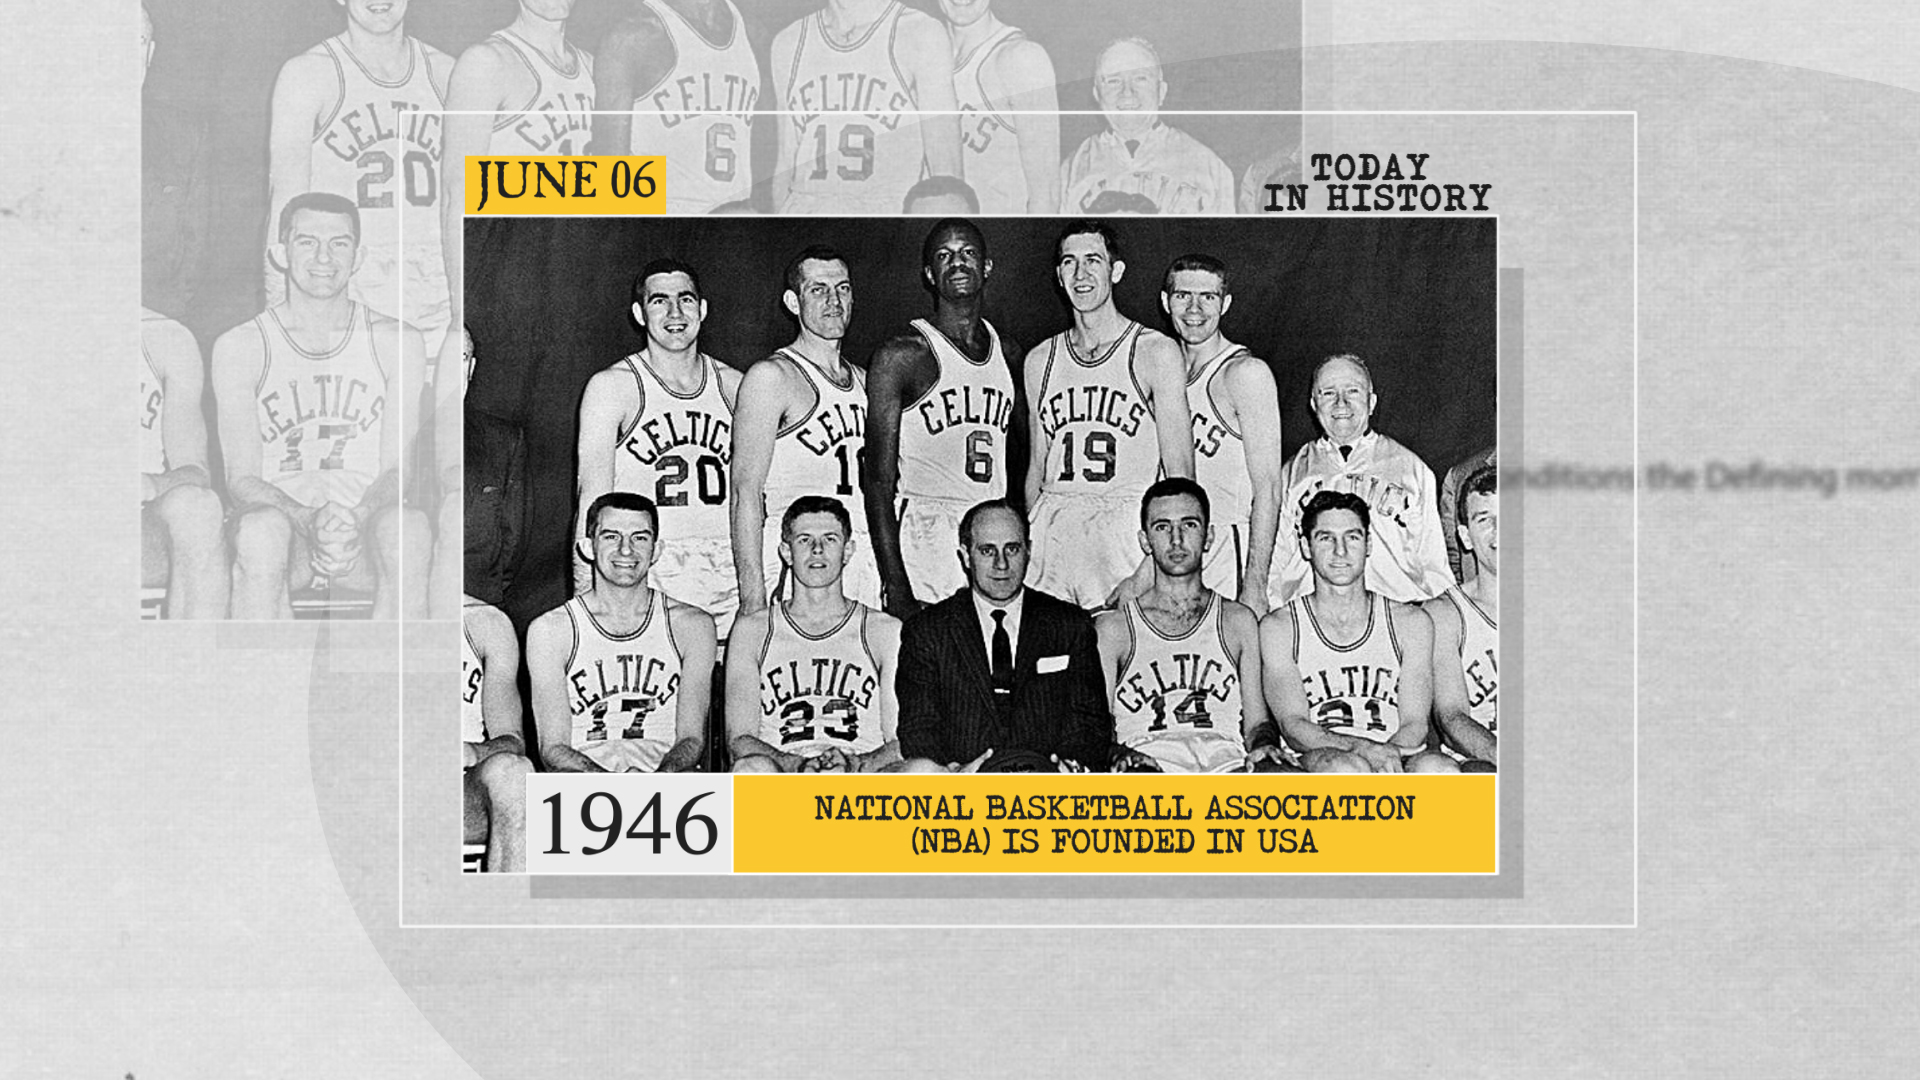 WION on X: "#TodayInHistory | 1946: National Basketball Association (NBA)  is founded in USA https://t.co/f4ZDFDfIjq" / X